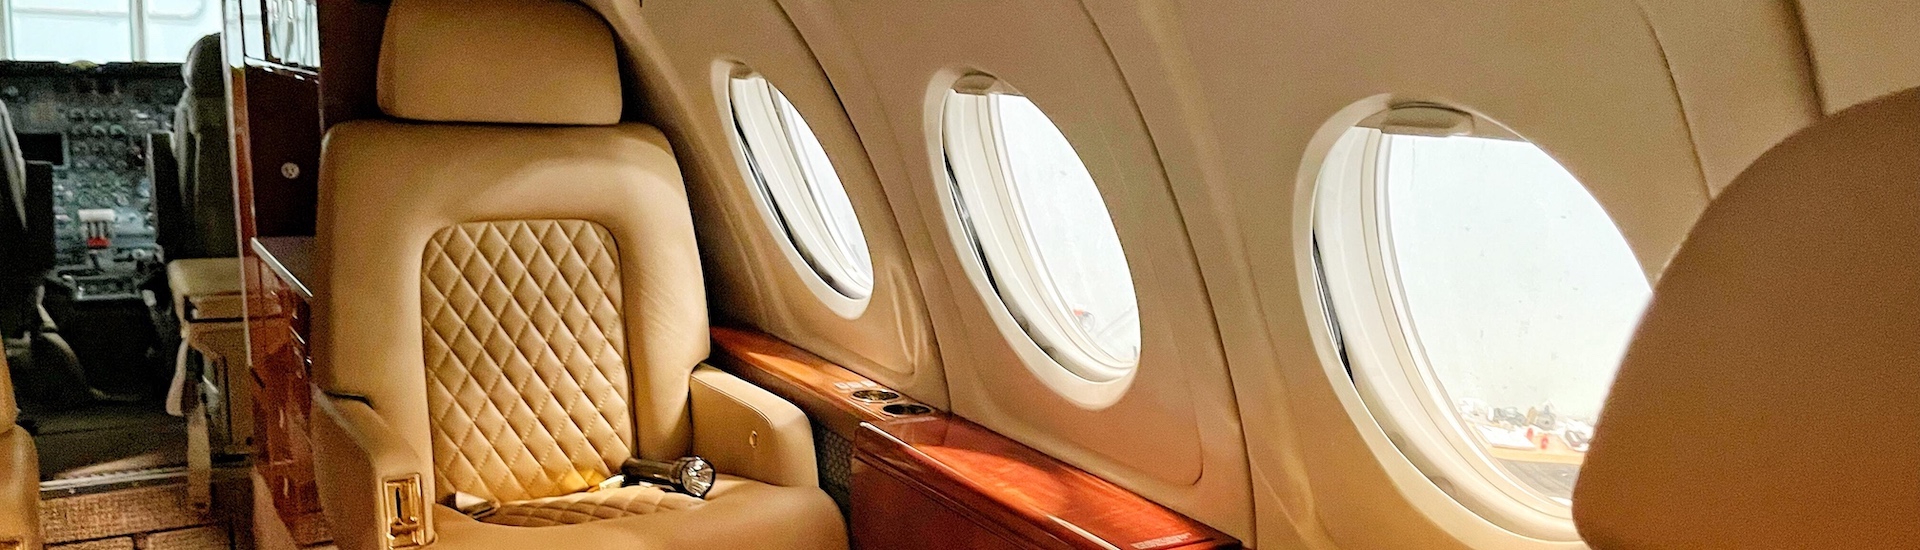 What to expect when traveling by private jet